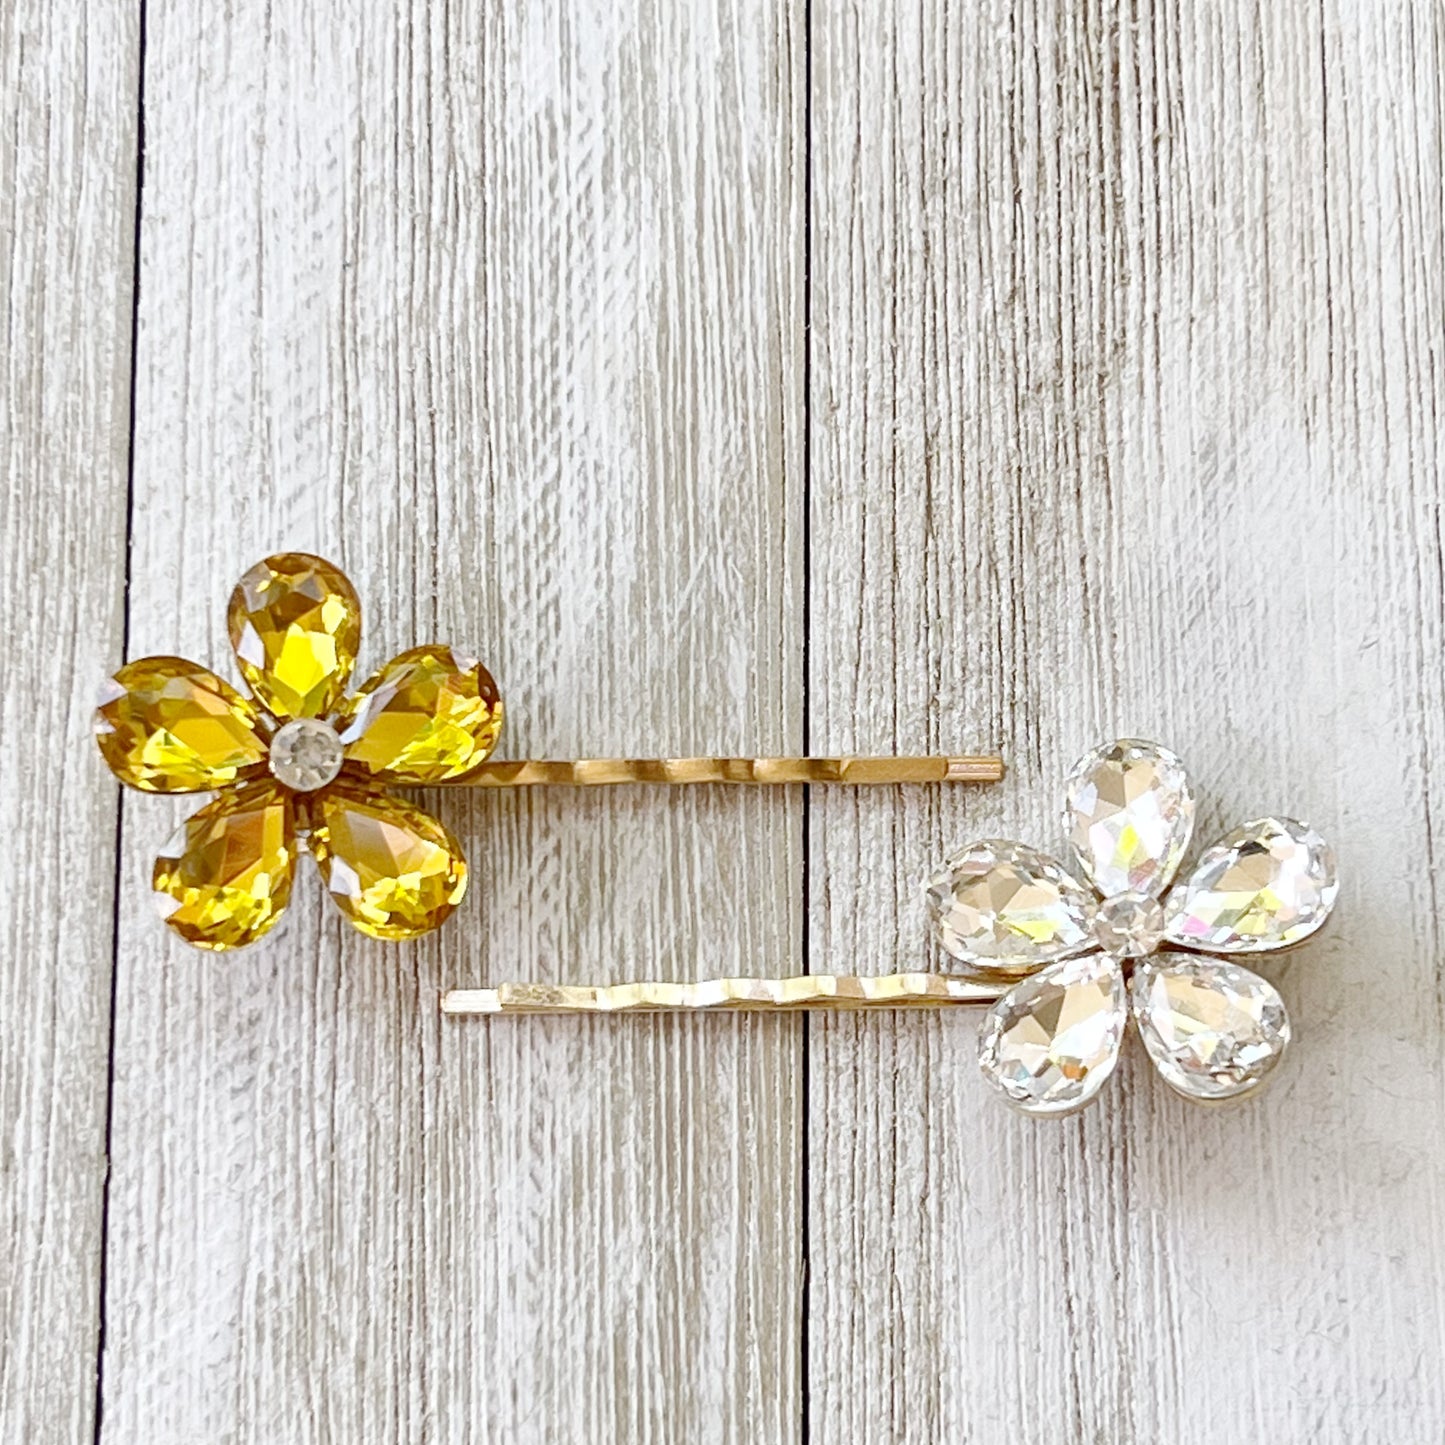 Yellow & Clear Rhinestone Flower Gold Bobby Pins: Stylish Accents for Glamorous Hairdos